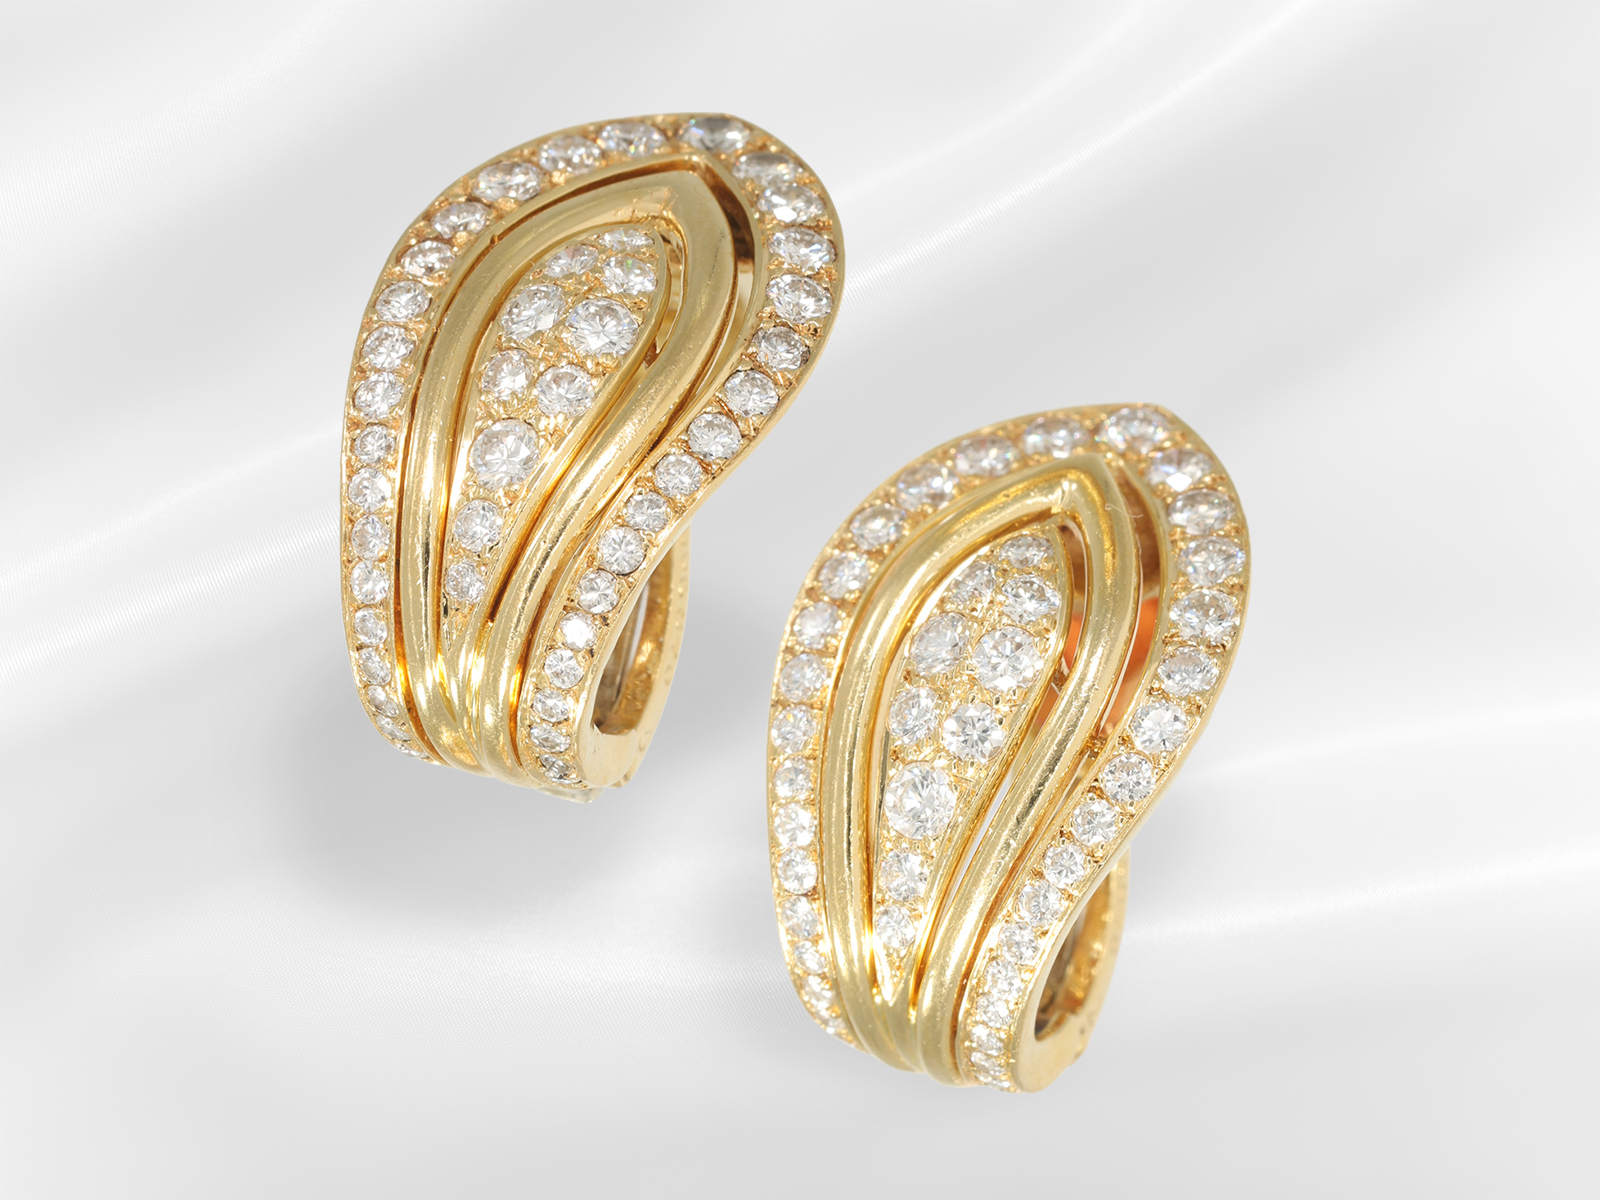 Earrings: high-quality vintage designer brilliant-cut diamond jewellery by Cartier, approx. 1.8ct